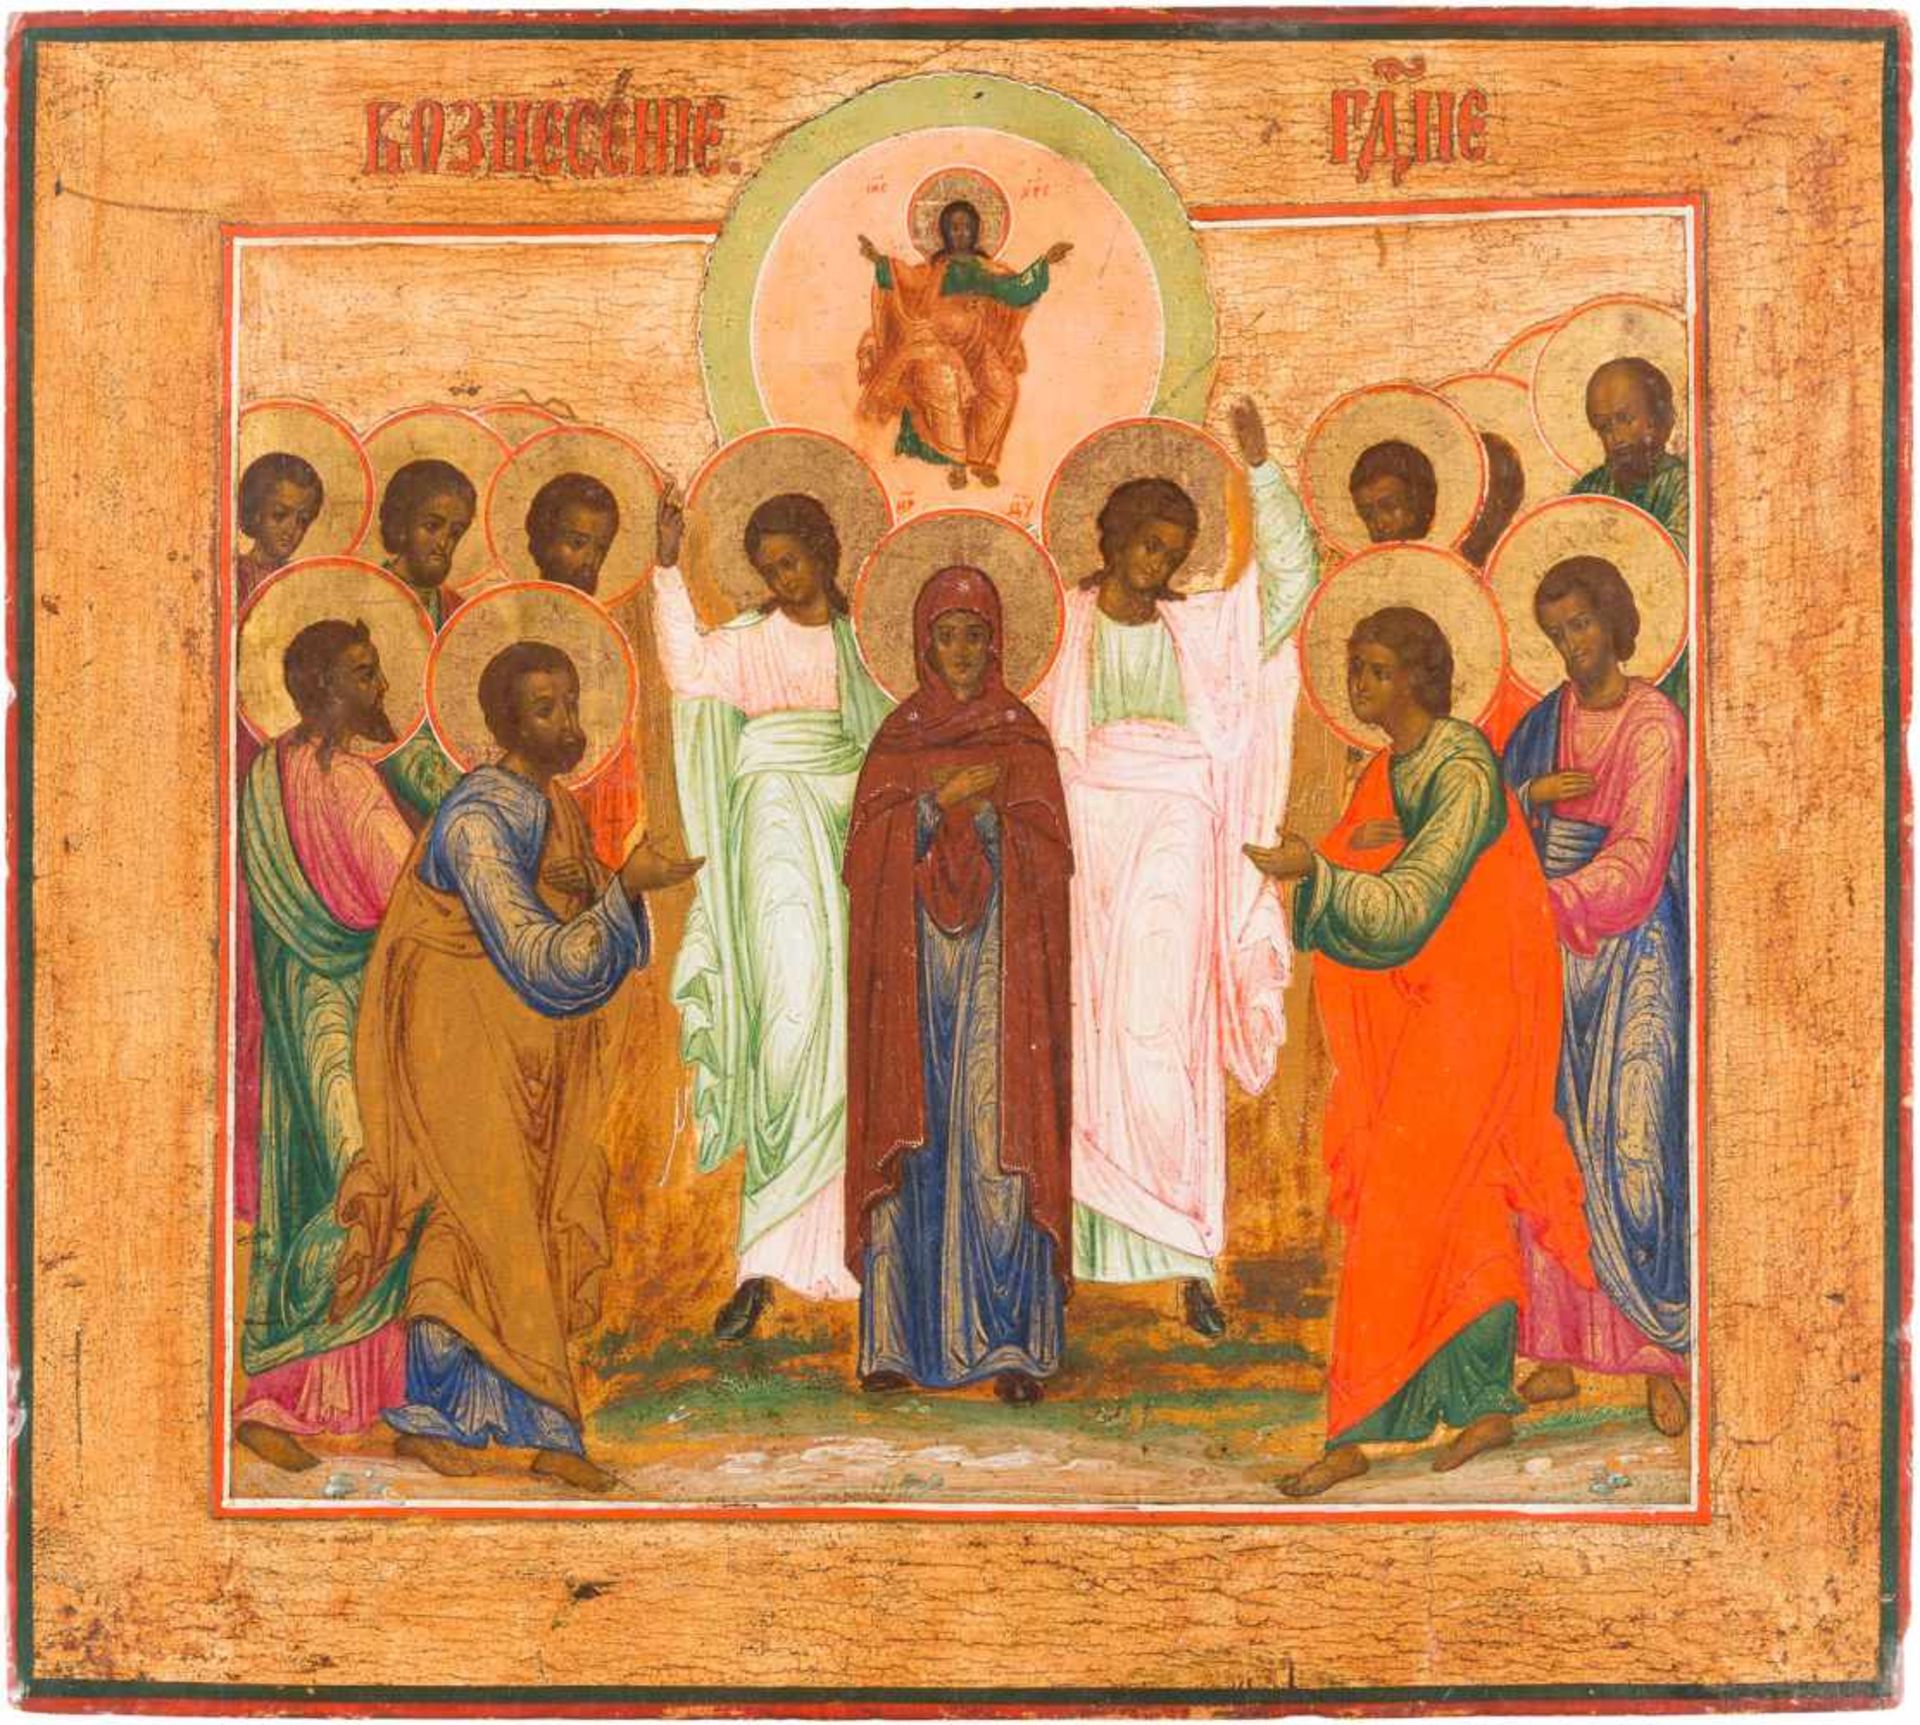 A LARGE ICON SHOWING THE ASCENSION OF CHRIST